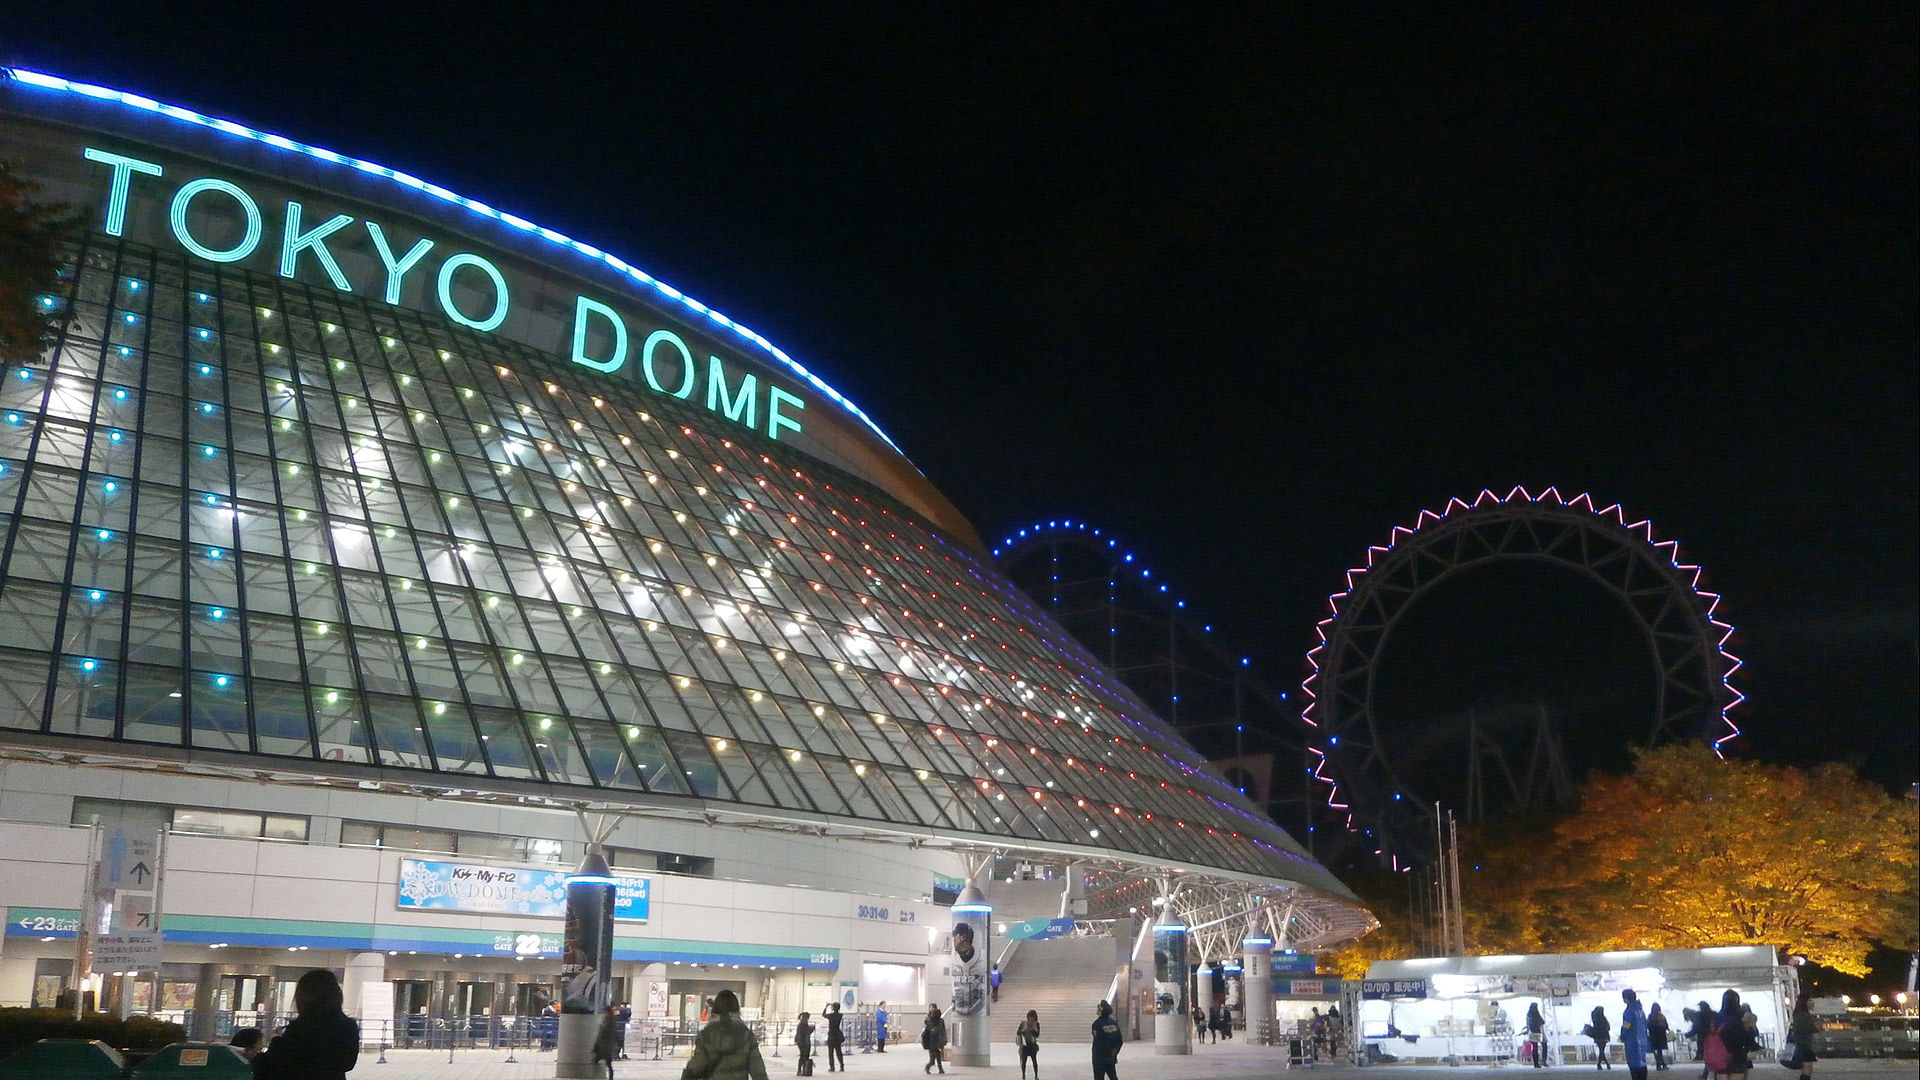 Safety first: The fate of concerts at venues such as Tokyo Dome has been thrown into doubt by the COVID-19 outbreak. | CC BY-SA 3.0 / J-PHOPHO